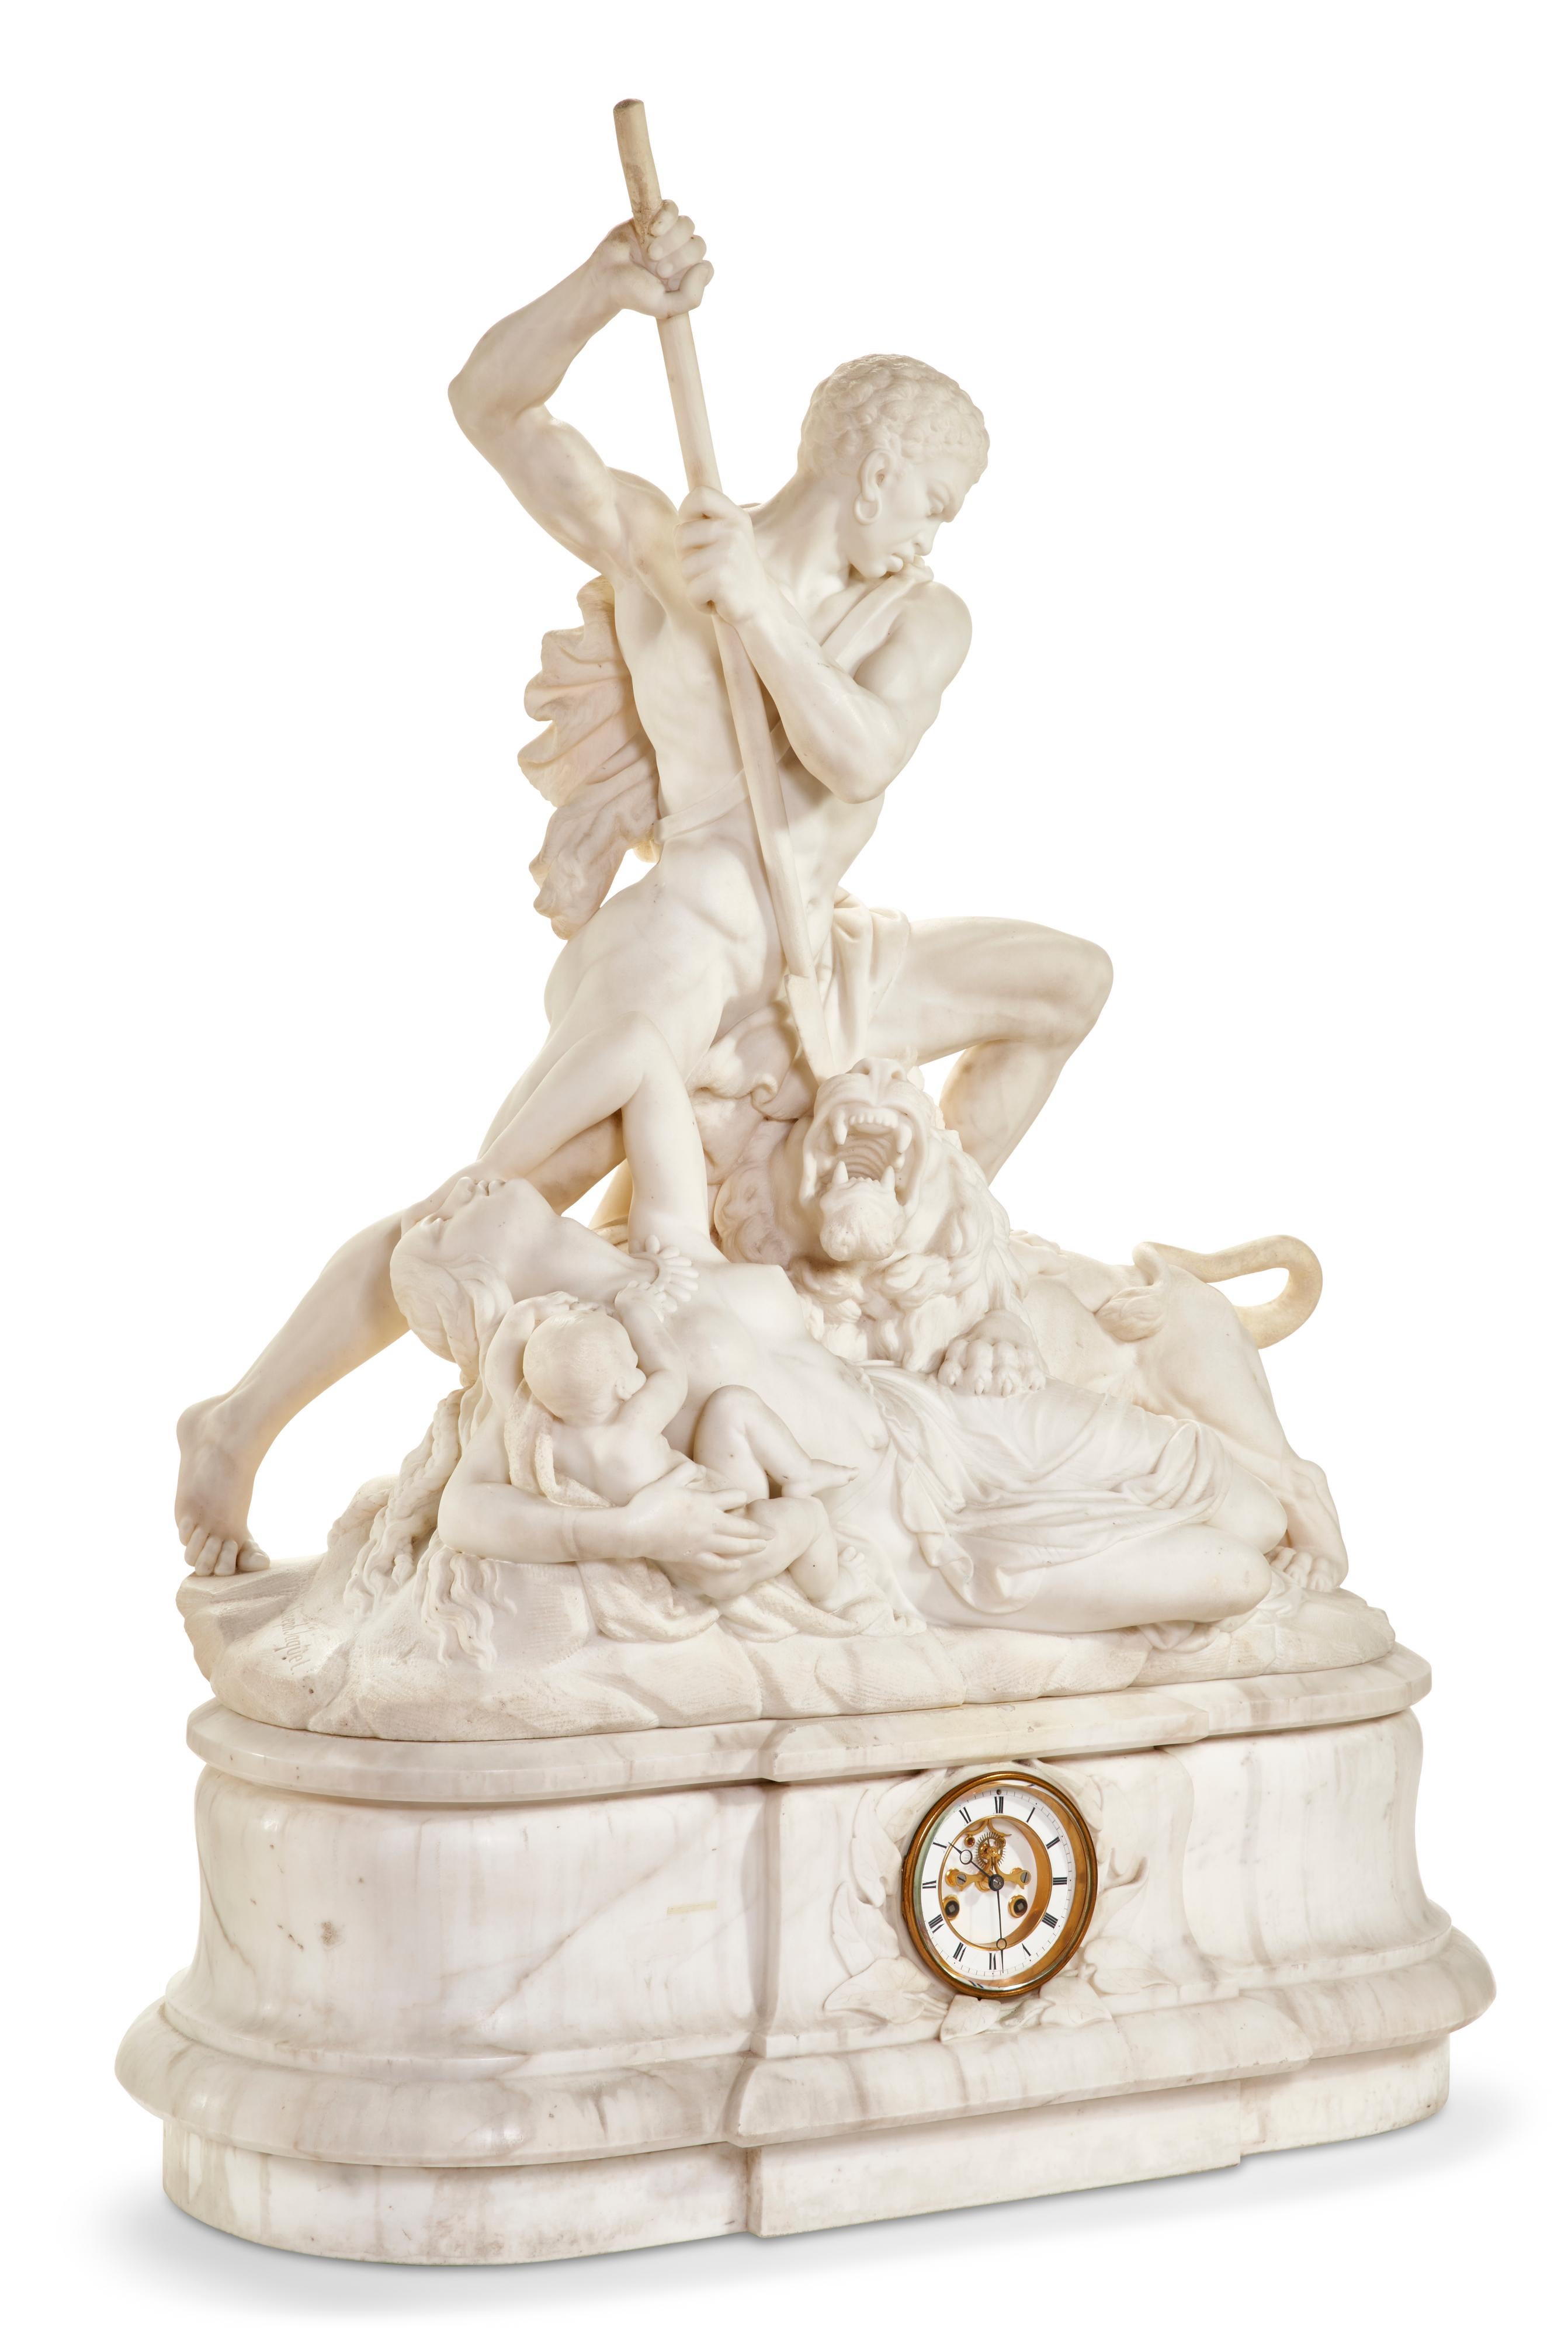 An exceptional and monumental white marble figural sculpture clock, 